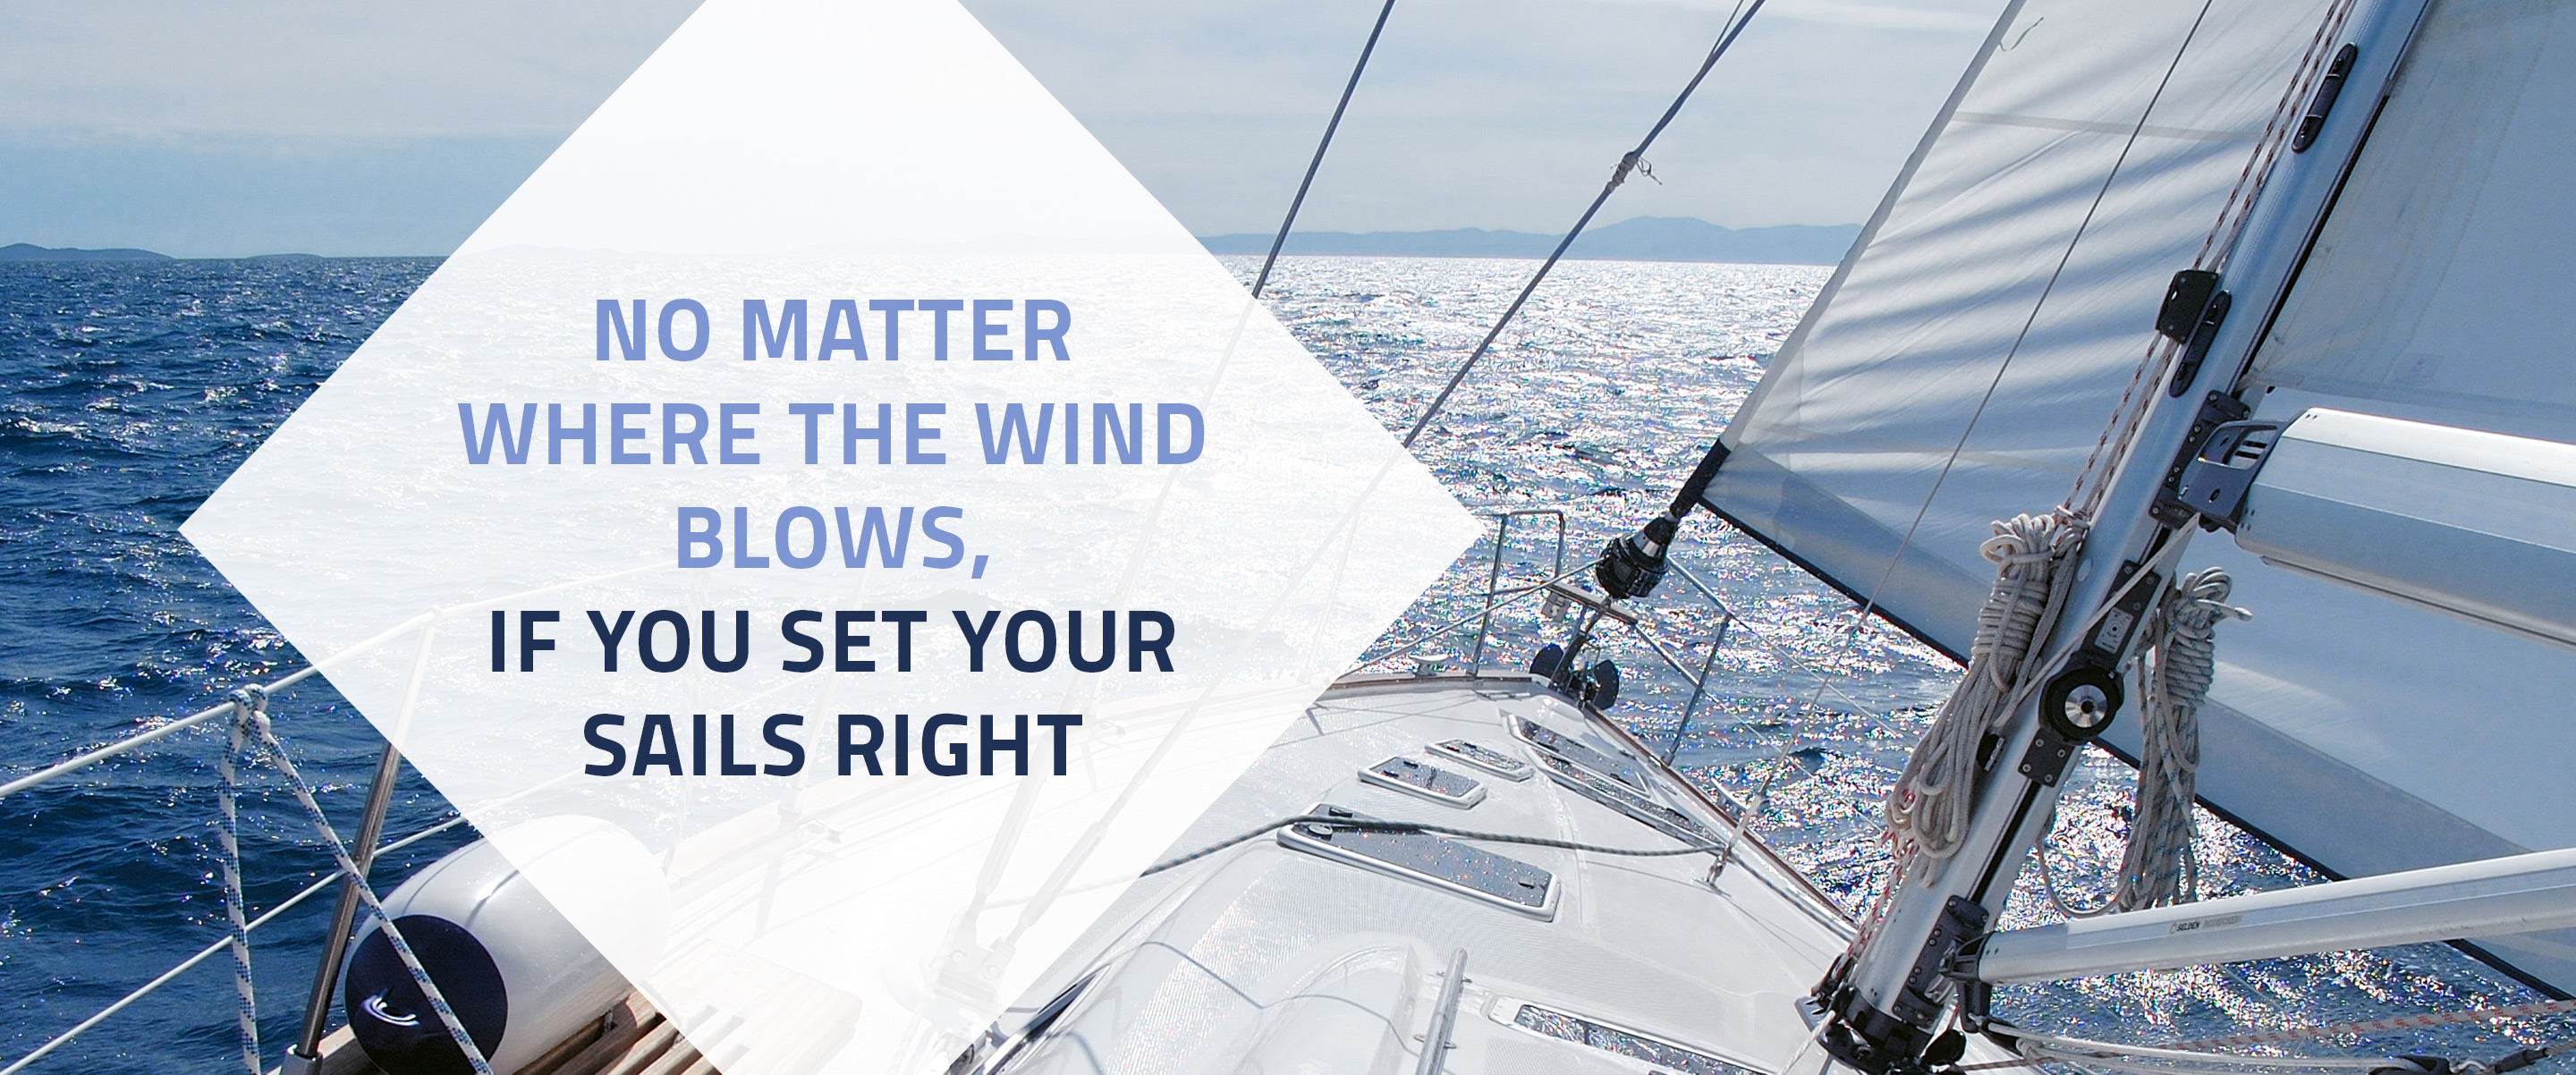 No matter where the wind blows, if you set your sails right. - Vestoq Ltd.